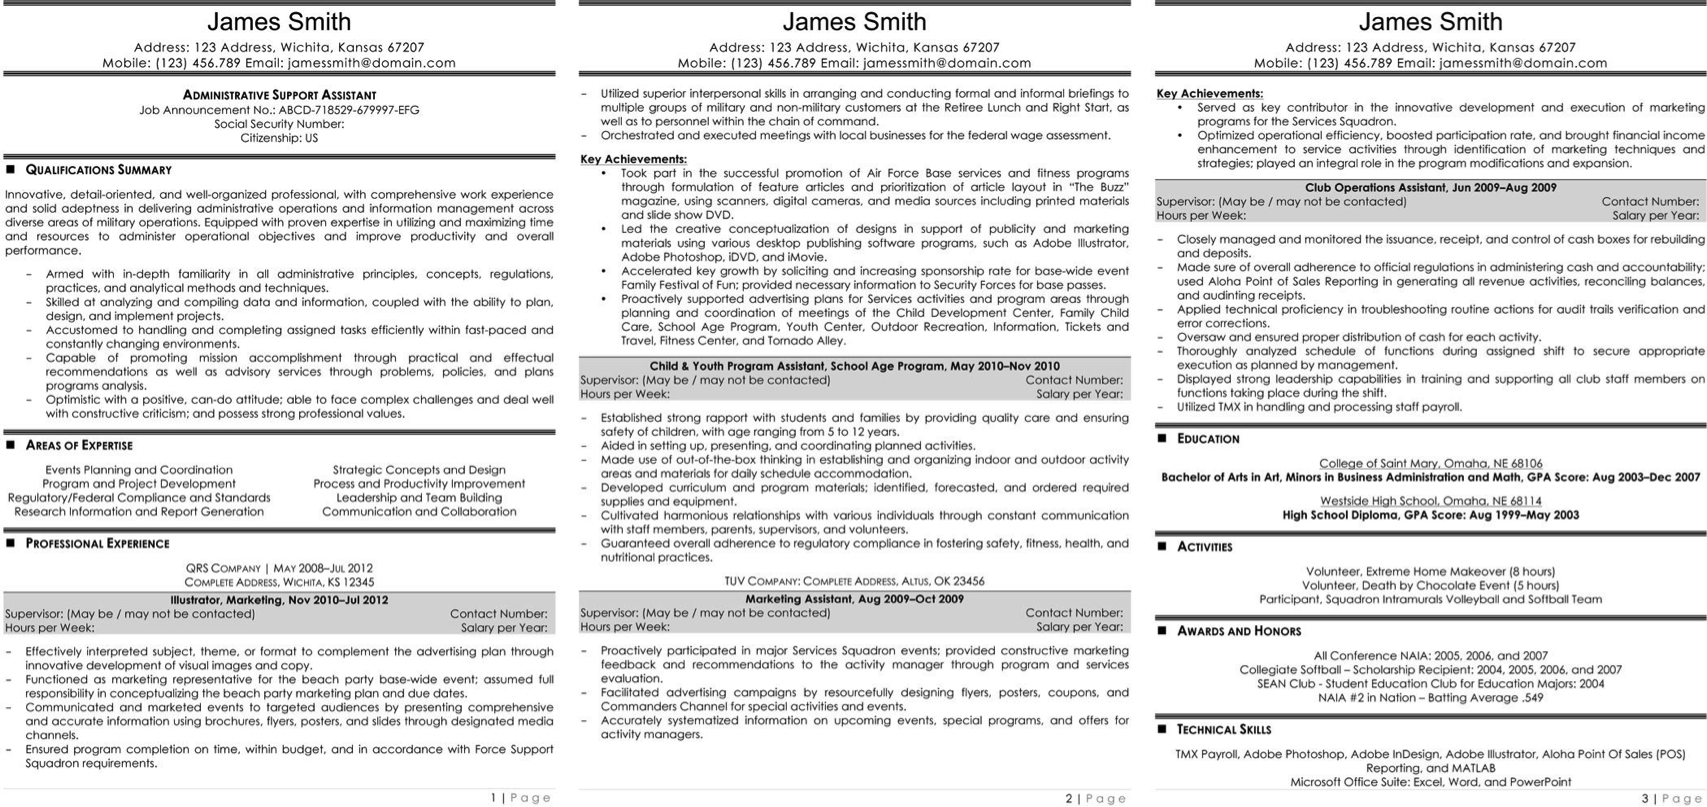 Federal Resume Template Untitled1 federal resume template|wikiresume.com